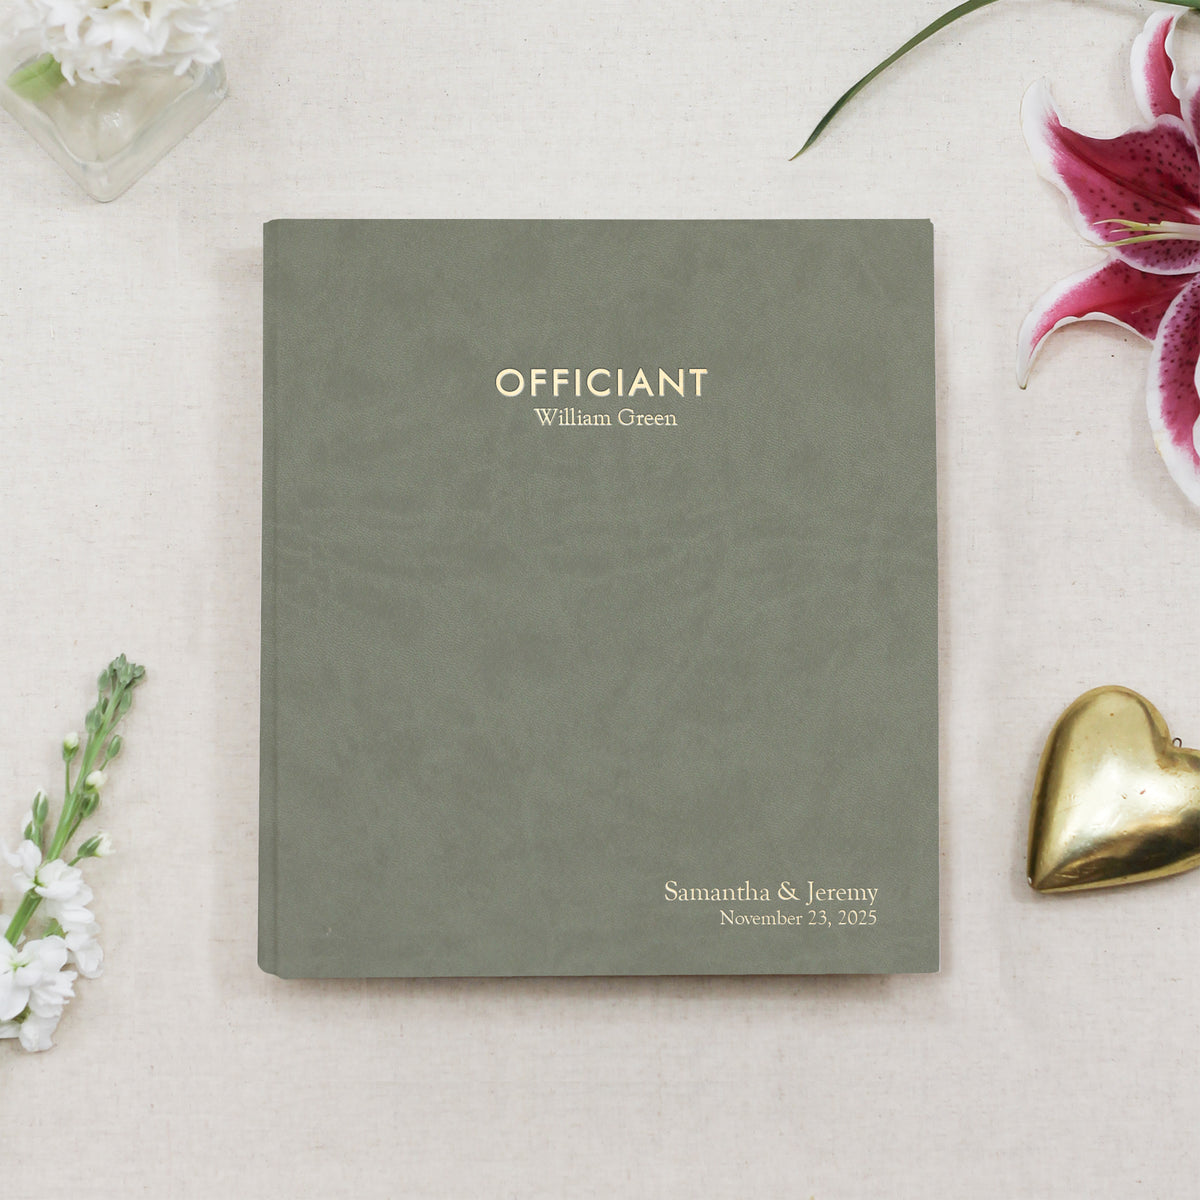 Officiant Binder | Cover: Moss Vegan Leather | Available Personalized